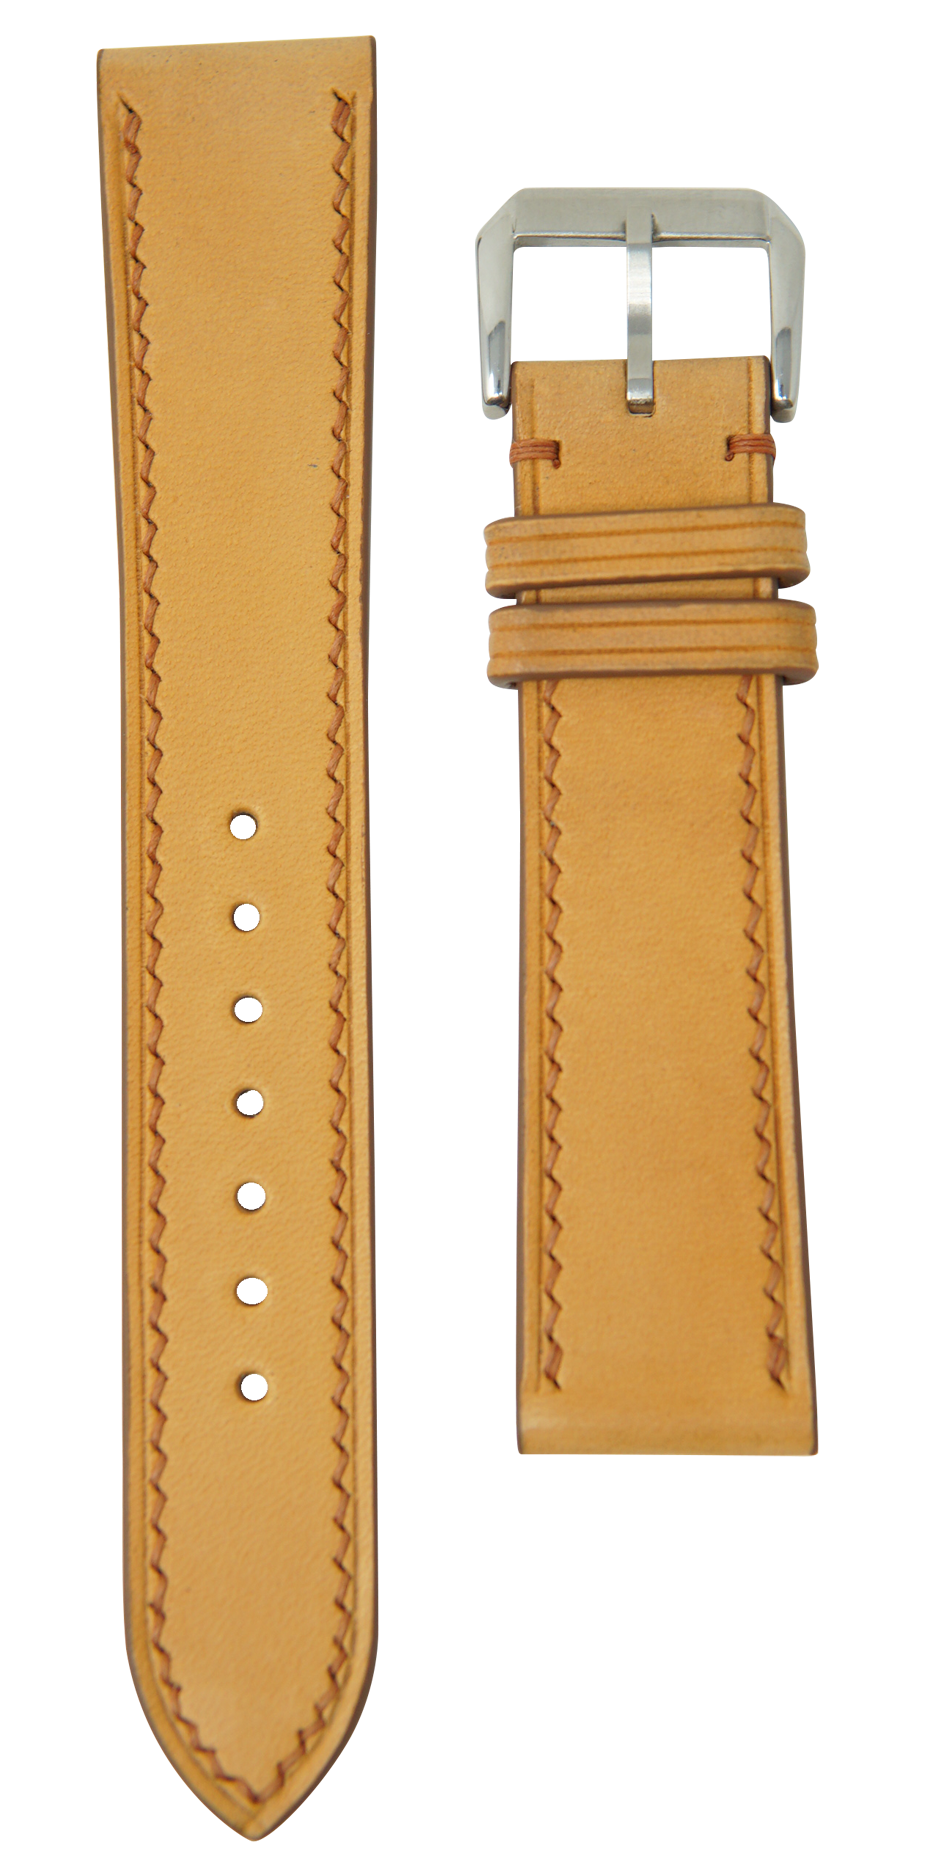 Buttero Leather Watch Strap - Natural